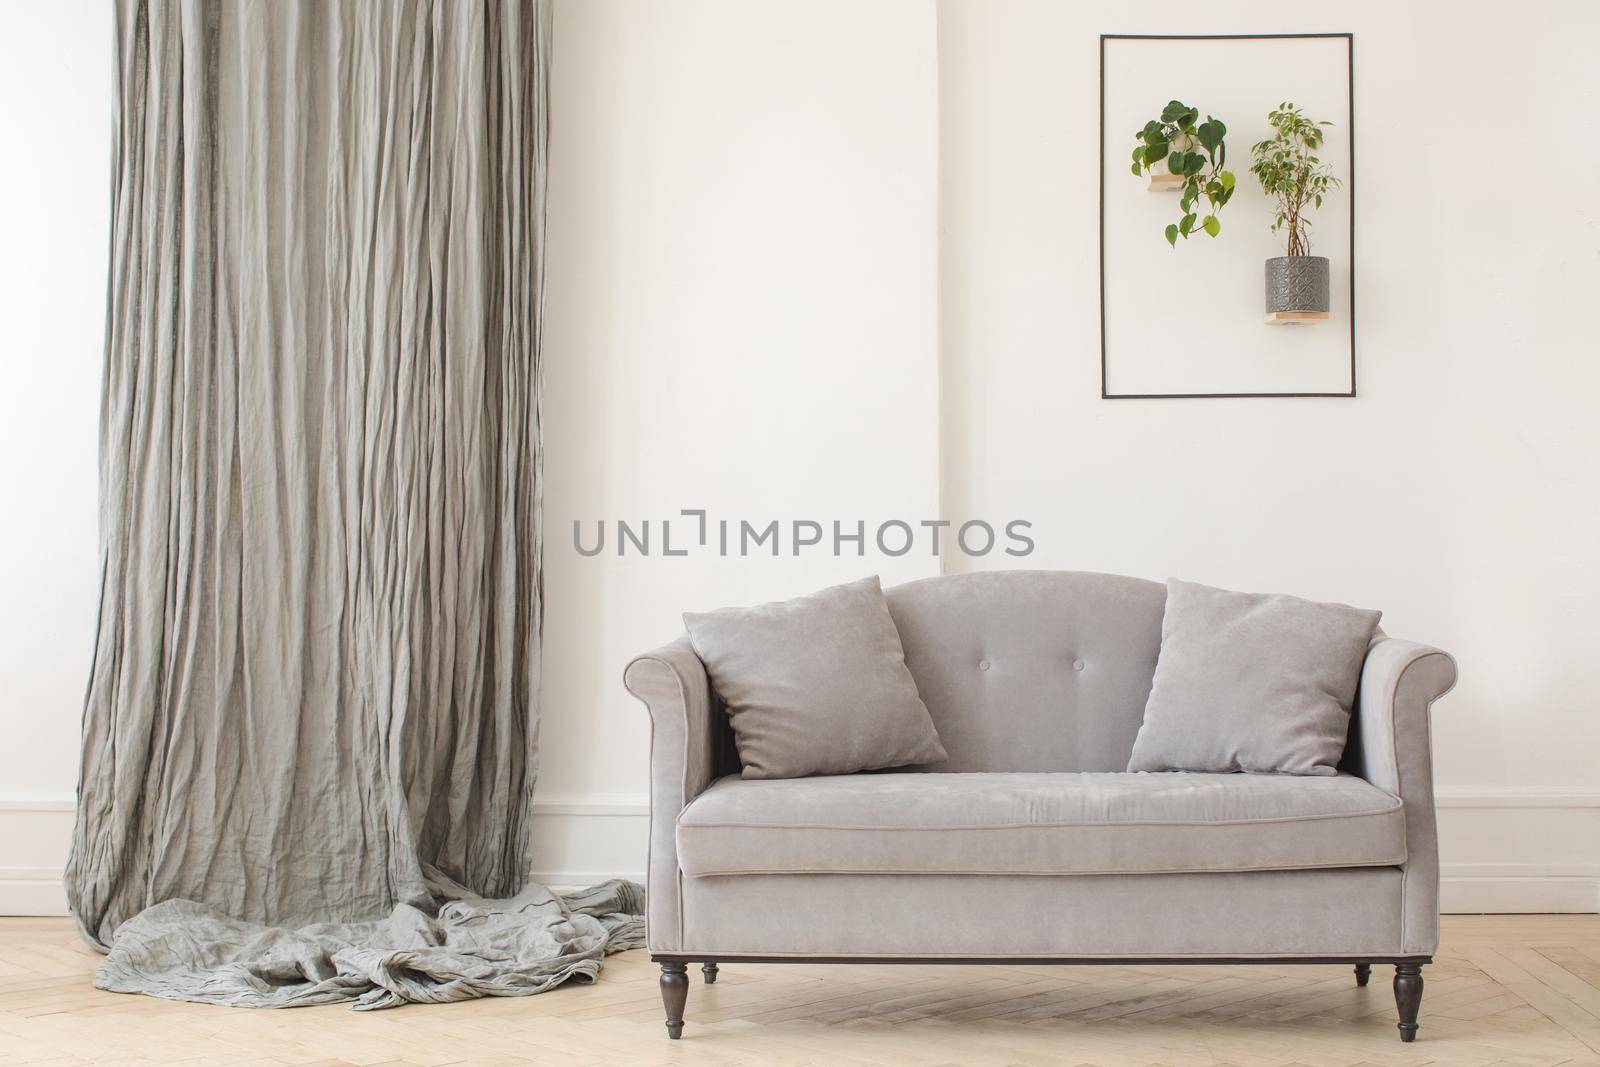 Elegant gray sofa with curtain on wall and creative green decor in light room.